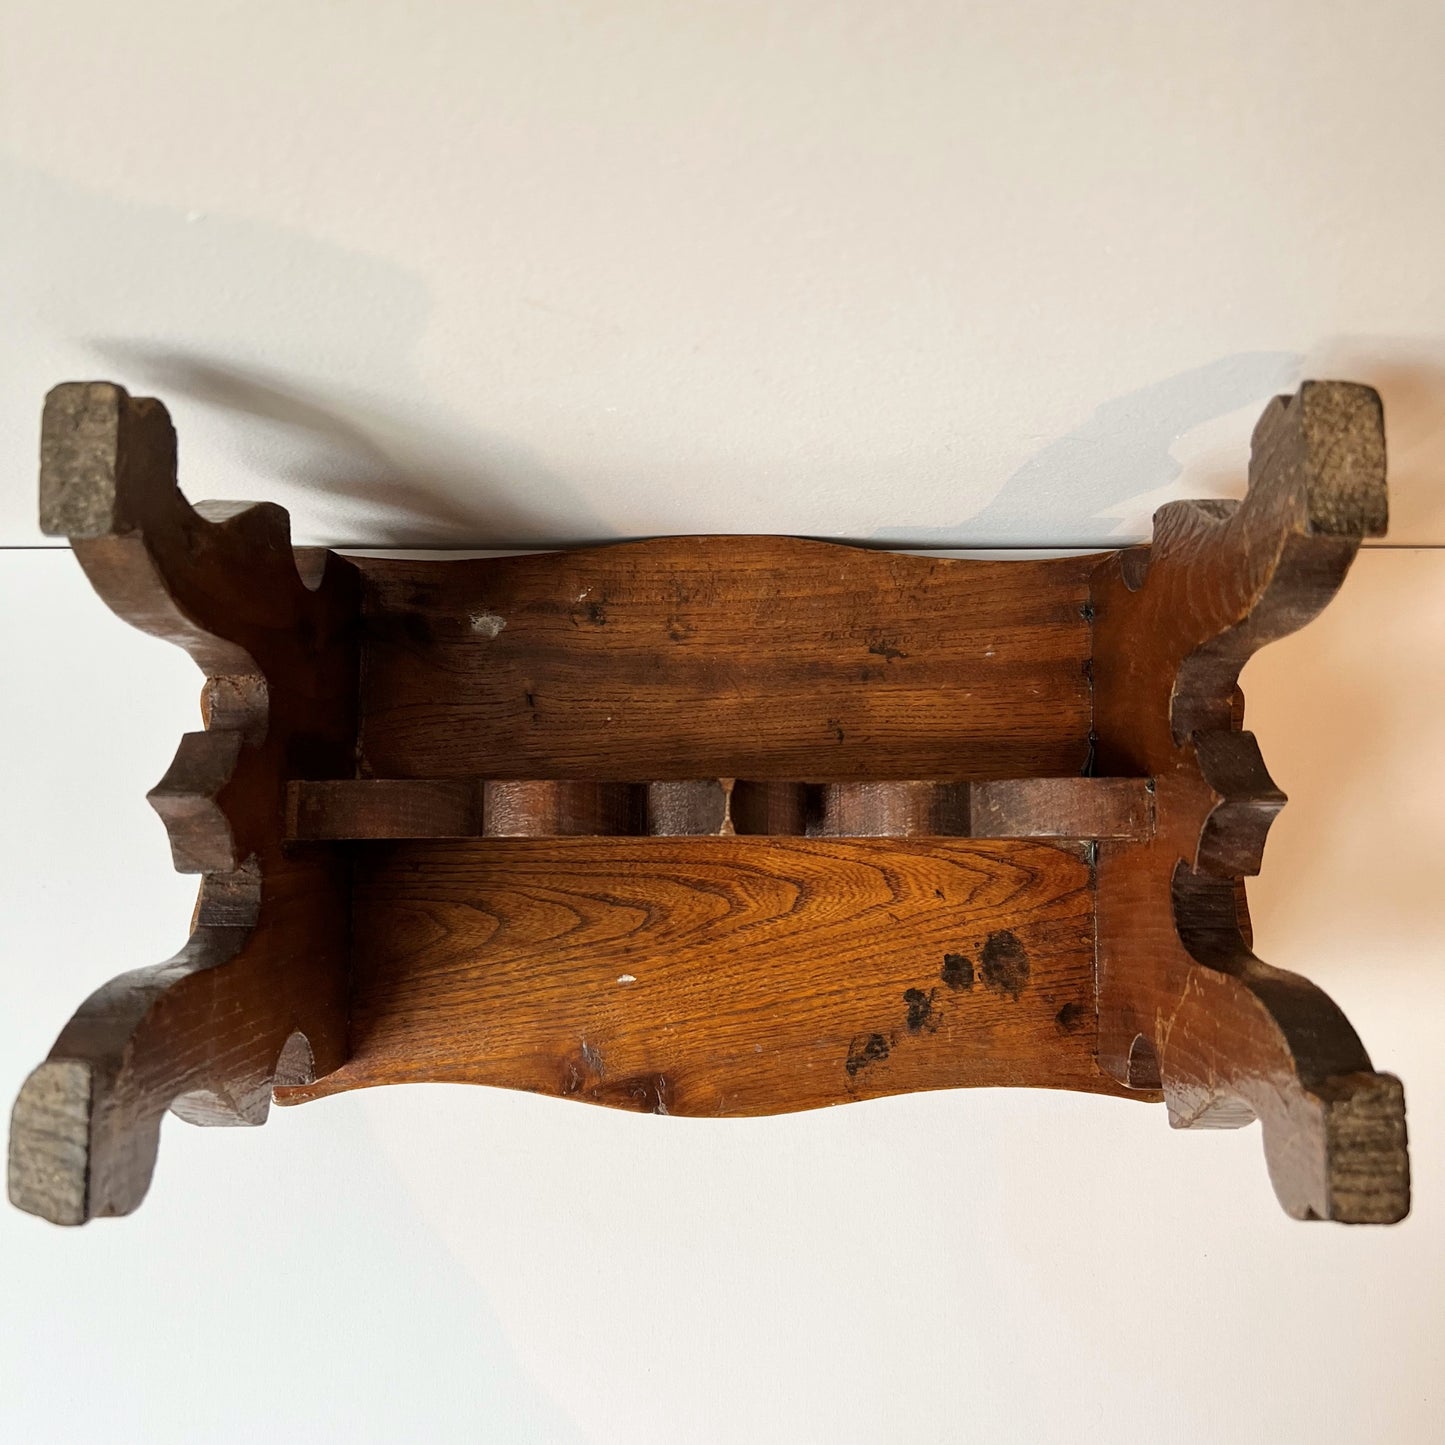 【Vintage】France - 1950s Small Wooden Stand B